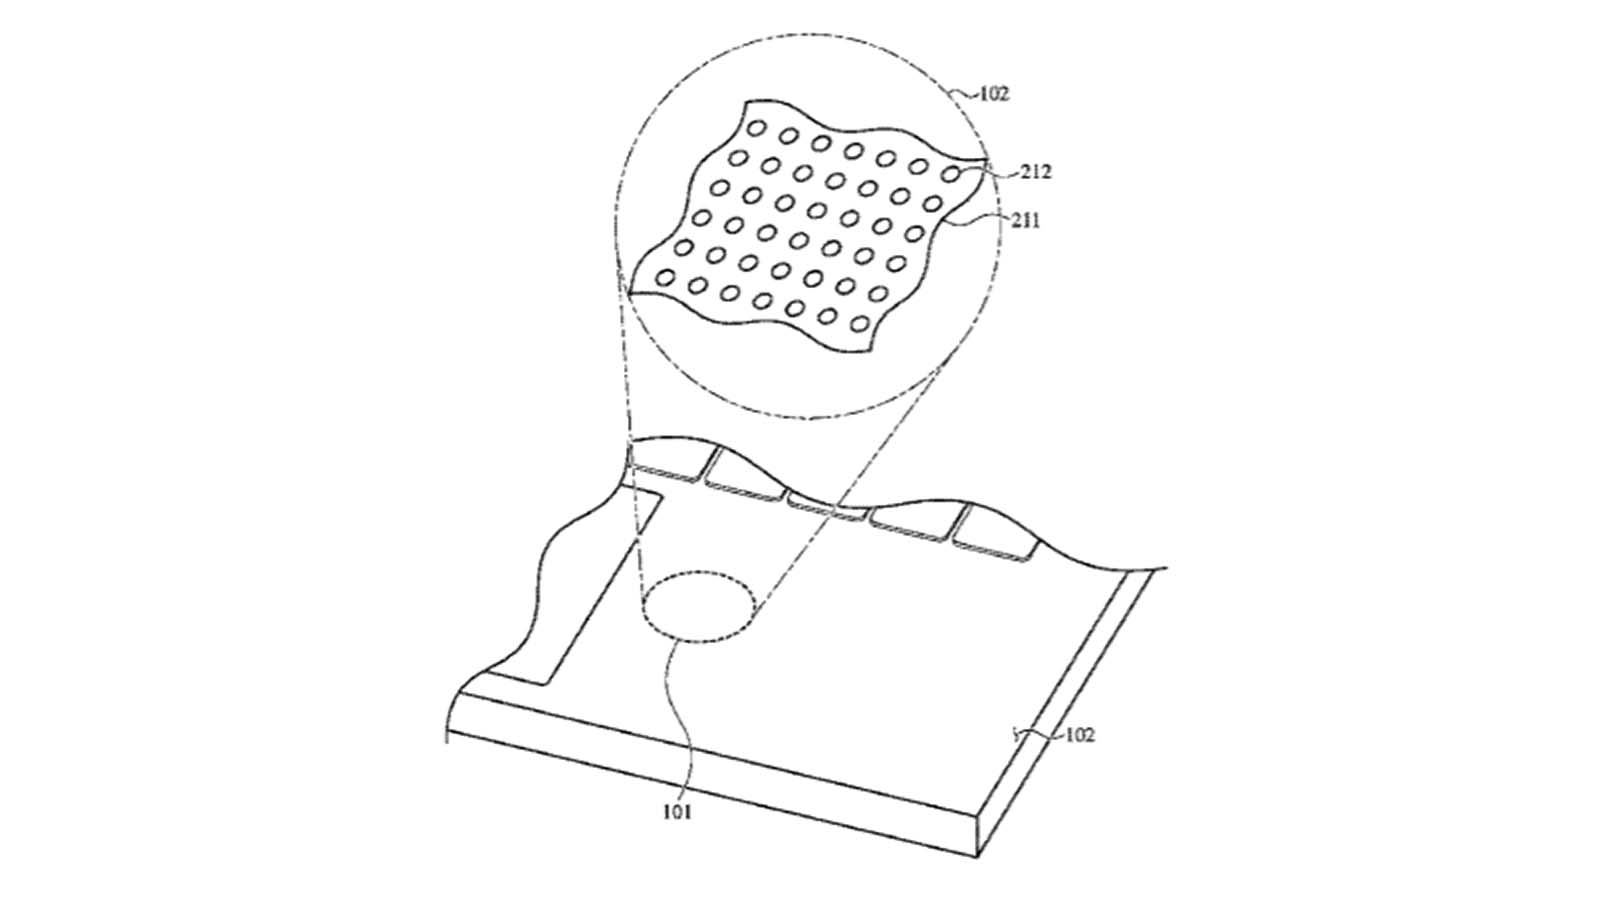 Apple Patent Drawings Showing A Heartrate Sensor In The Palm Rest Of A MacBook